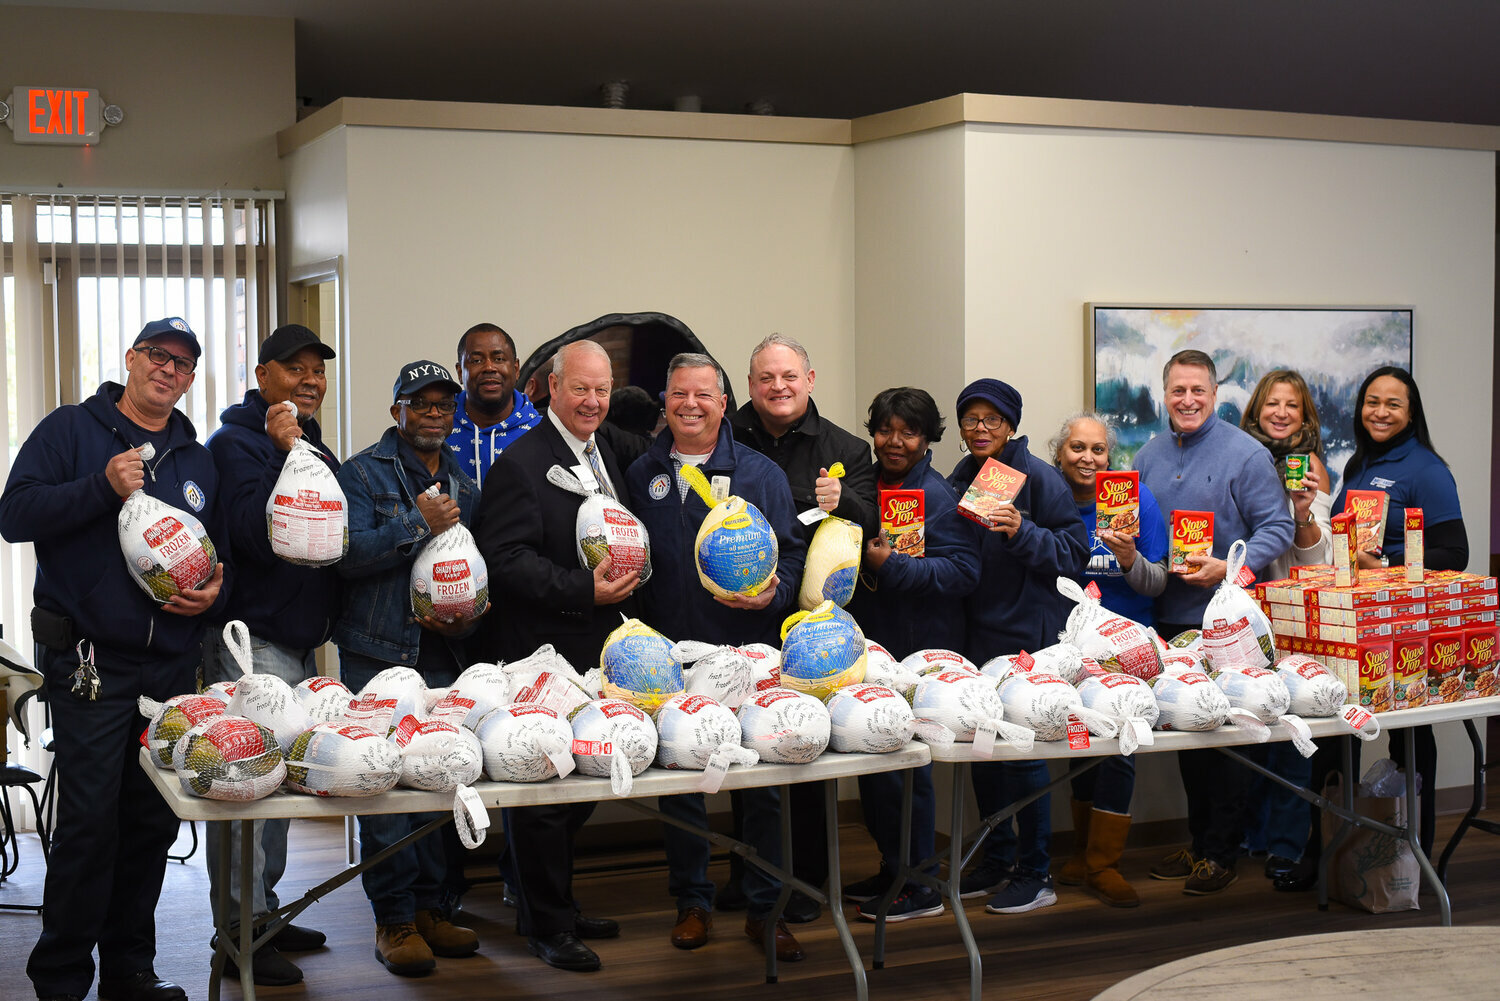 Assemblyman Brian Curran, in partnership with Green Acres Mall, Freeport Housing Authority, and Mayor Robert Kennedy, delivered turkeys to Freeport residents.